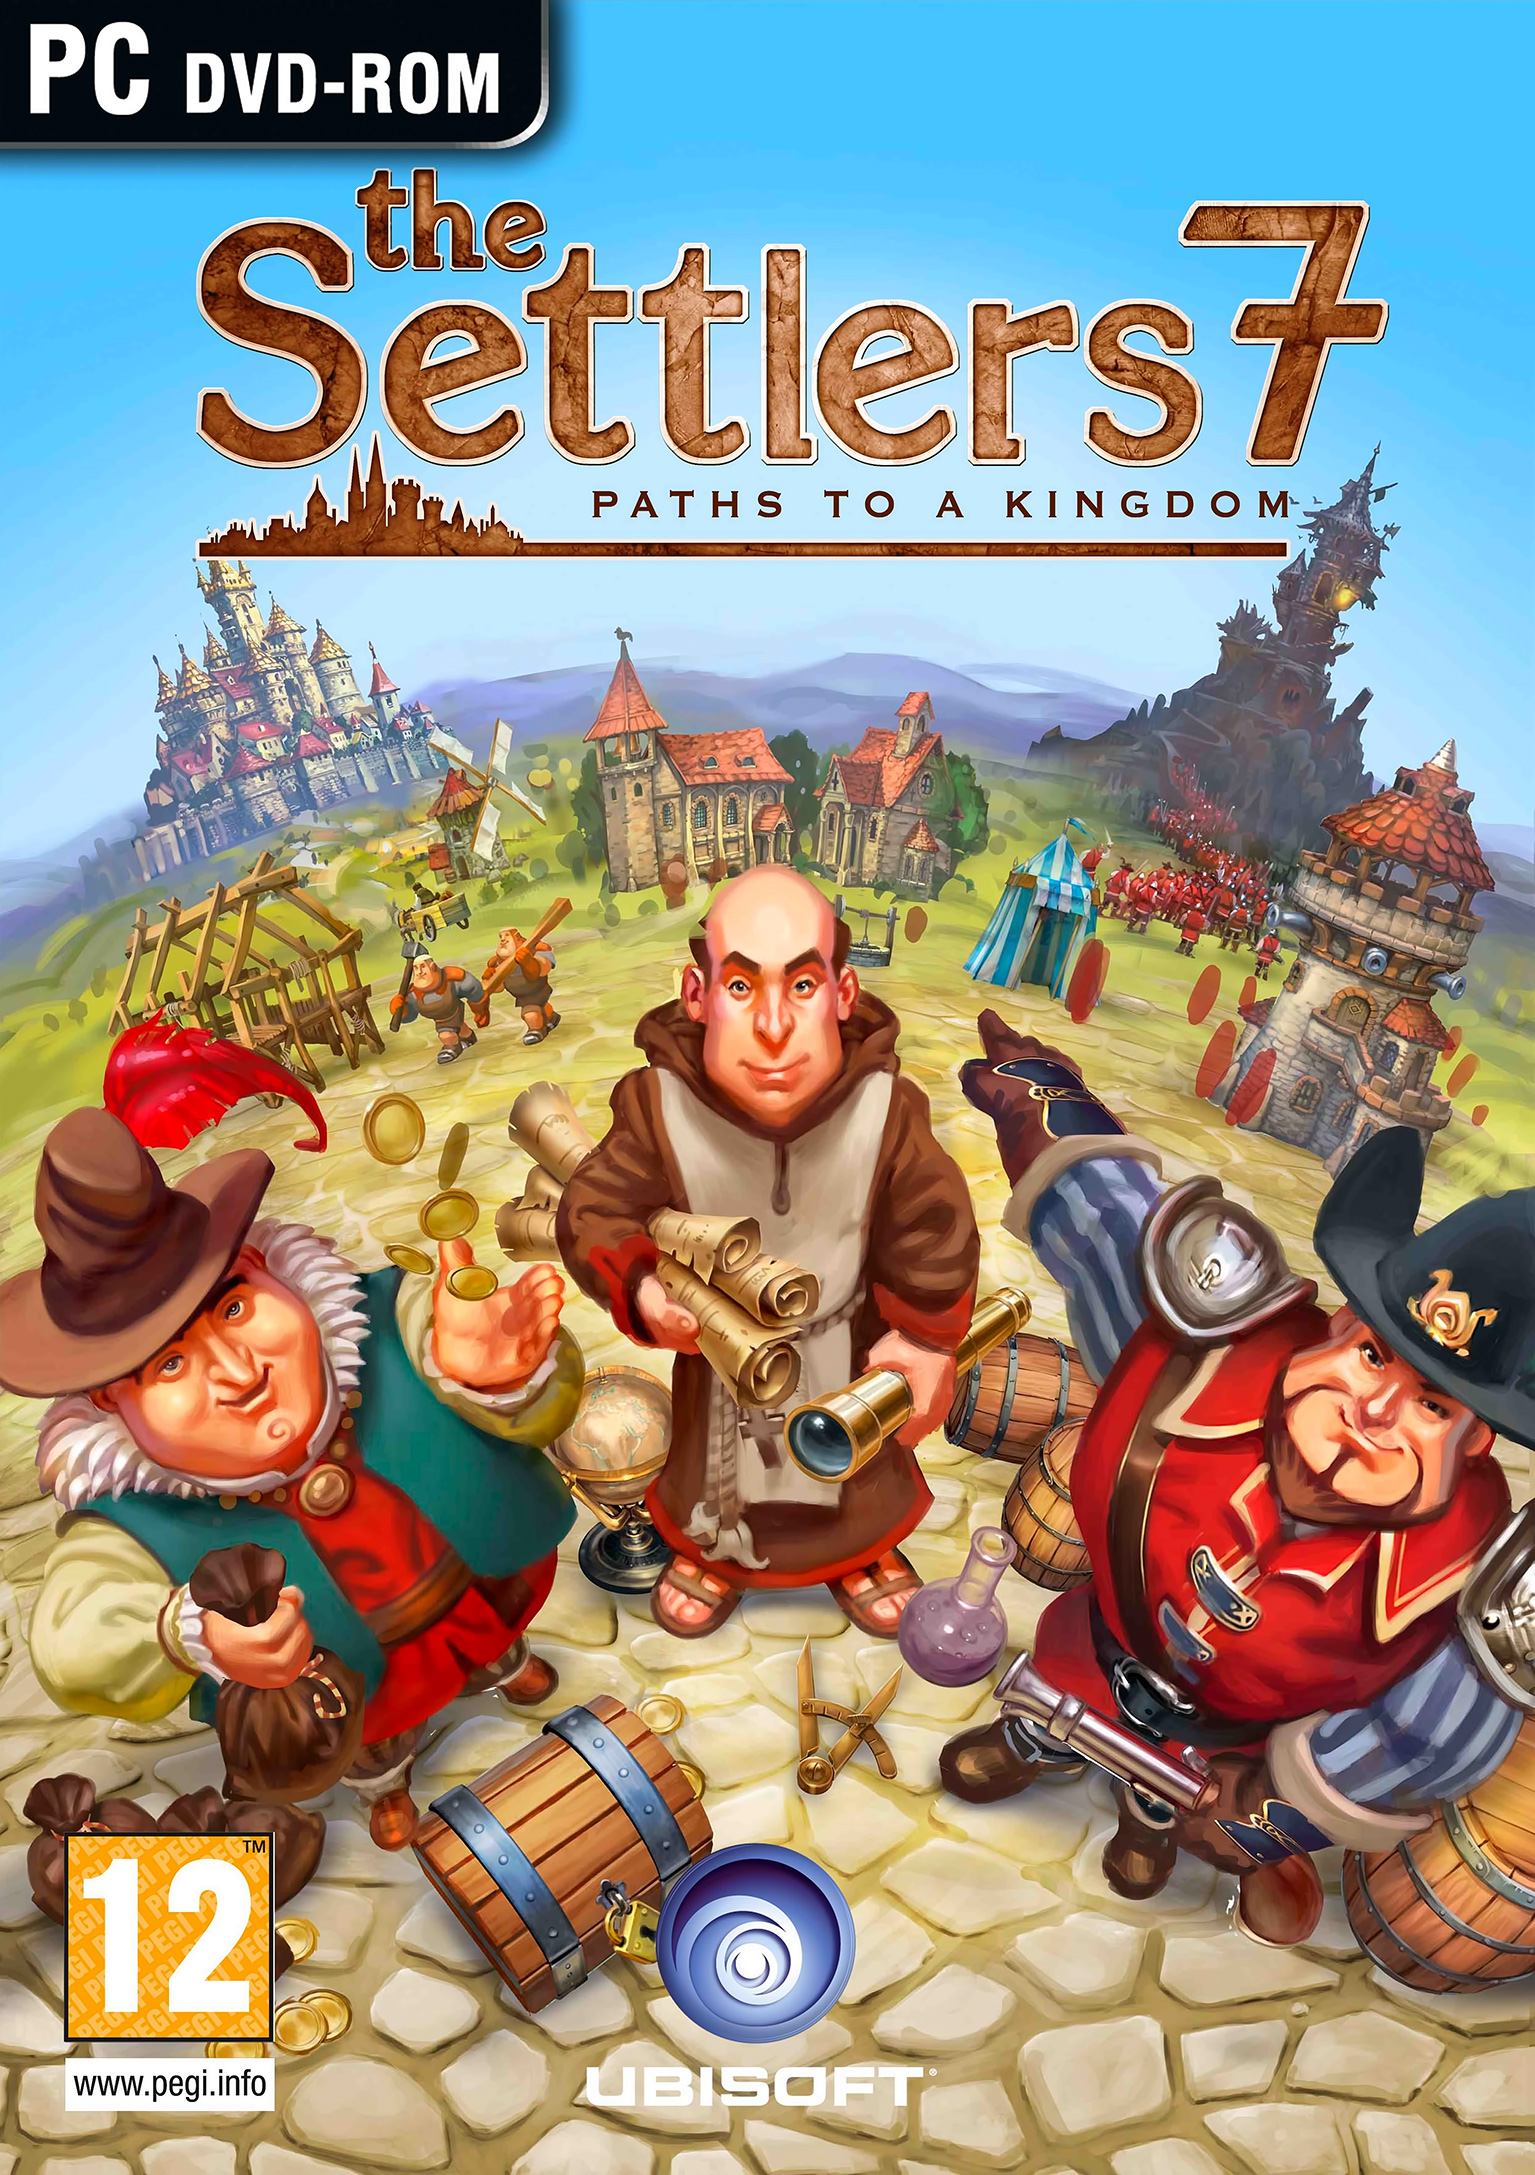 The Settlers 7: Paths to a Kingdom - predn DVD obal 3